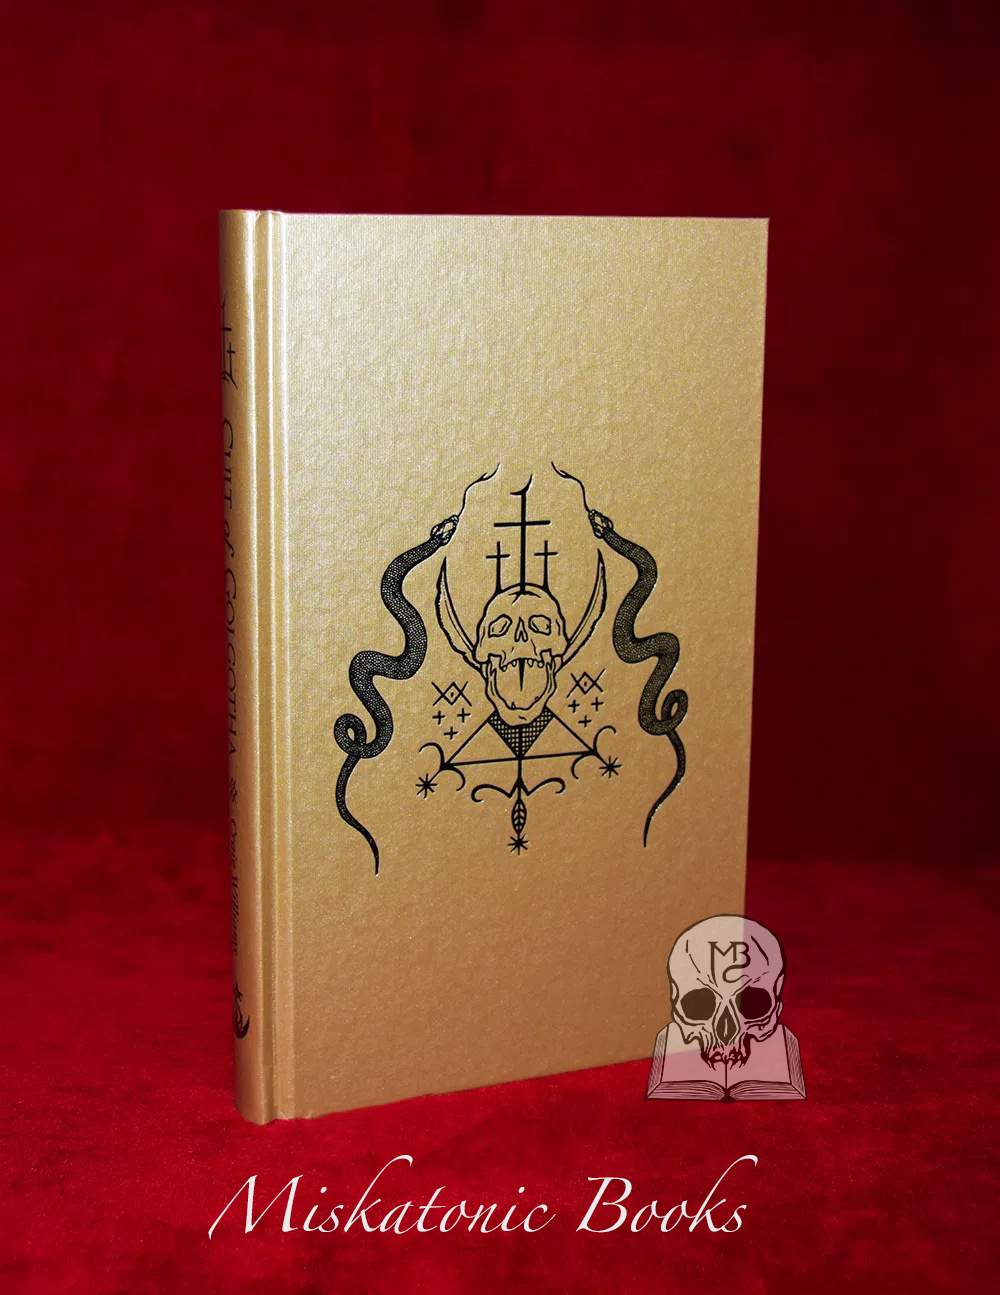 CULT OF GOLGOTHA by Craig Williams (Deluxe Limited Edition Hardcover)